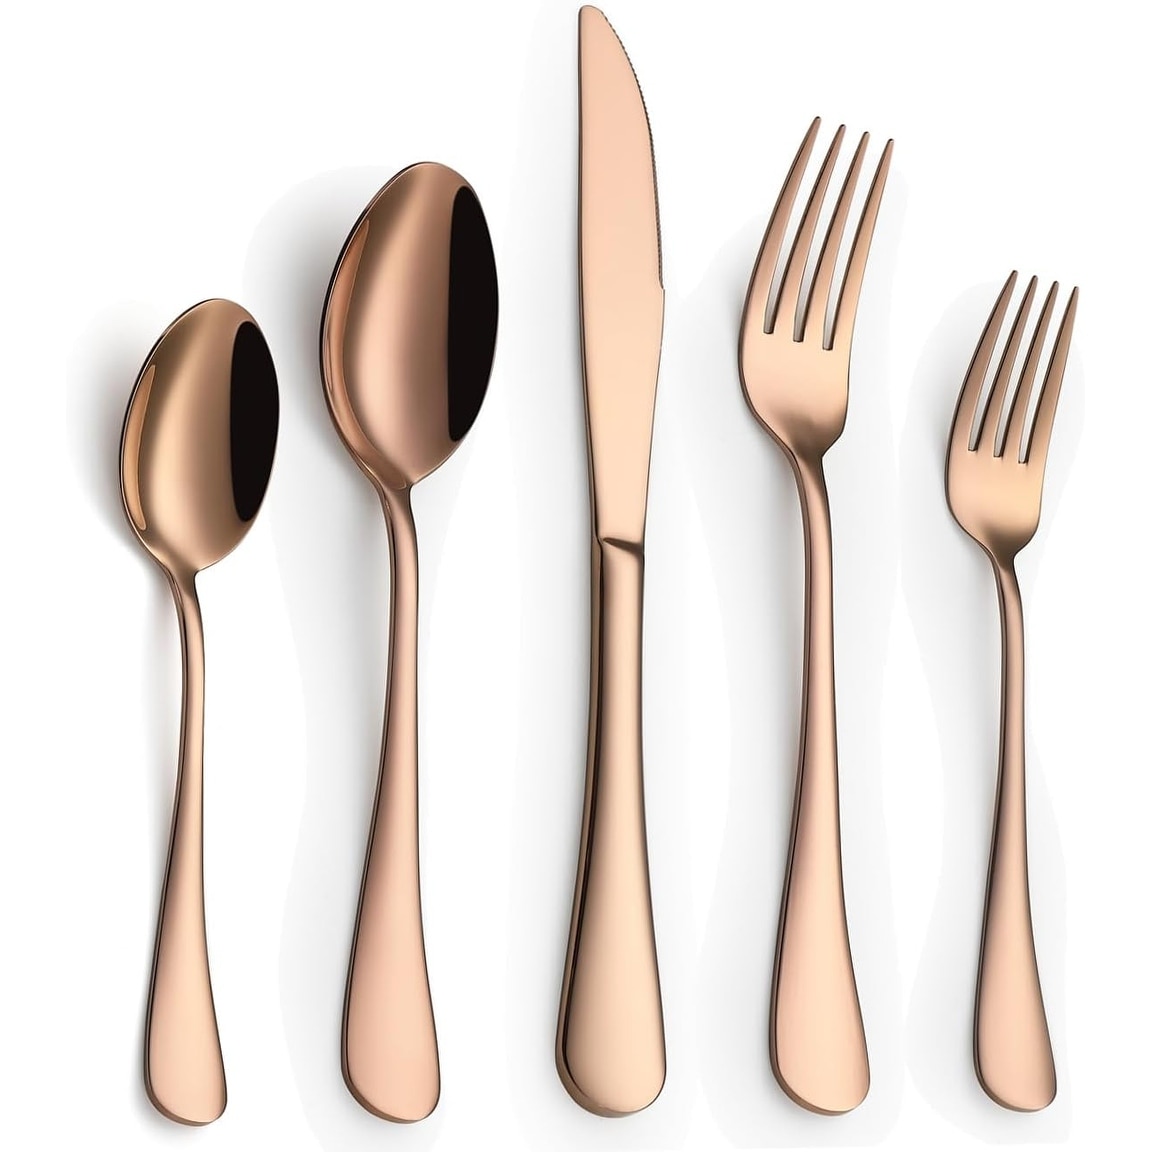 https://ak1.ostkcdn.com/images/products/is/images/direct/5c2b34611ab56896234bb03744e28ca9b3c9fc96/Stainless-Steel-20-Piece-Silverware-Set-for-4.jpg